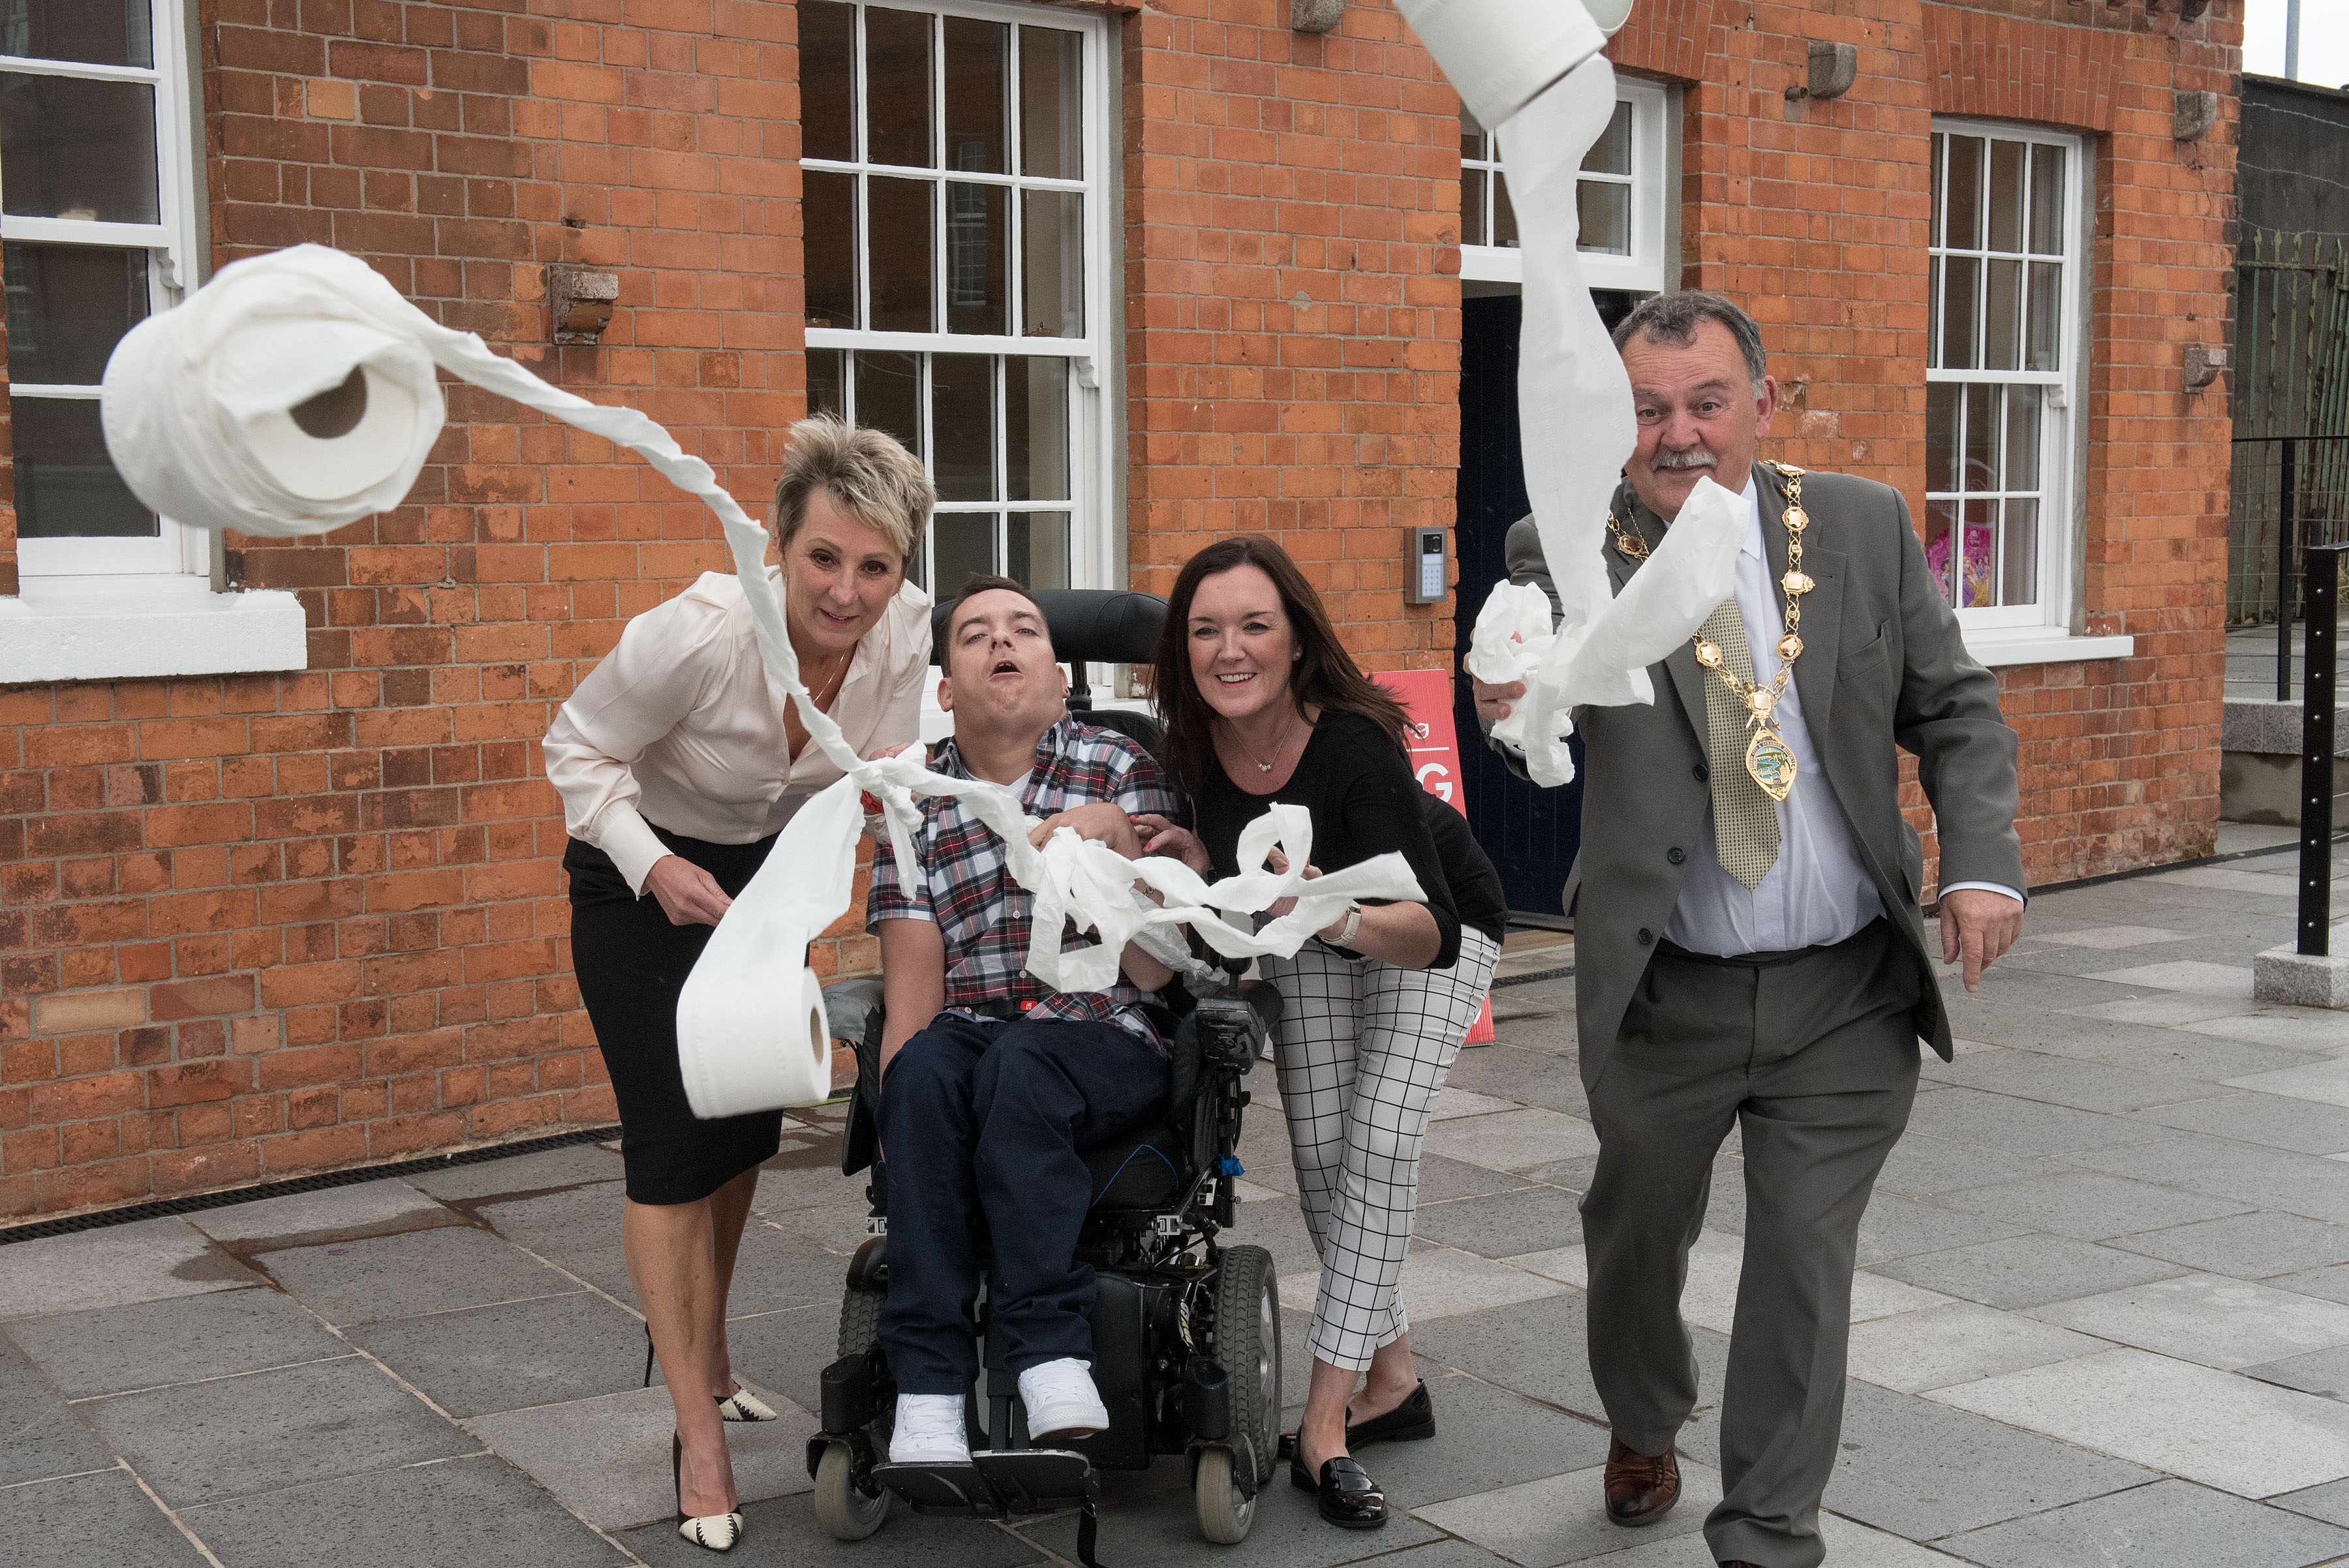 Linda Beckett, General Manager of Glen Caring, Jonathan Hagon, service user, Orla McCann, Disability Action NI and the Mayor of Derry City and Strabane District Council, Councillor Maolíosa McHugh celebrate the opening of the new Glen Caring State-of-the-Art ‘Changing Places’ facility in Ebrington Square, Derry/Londonderry. 